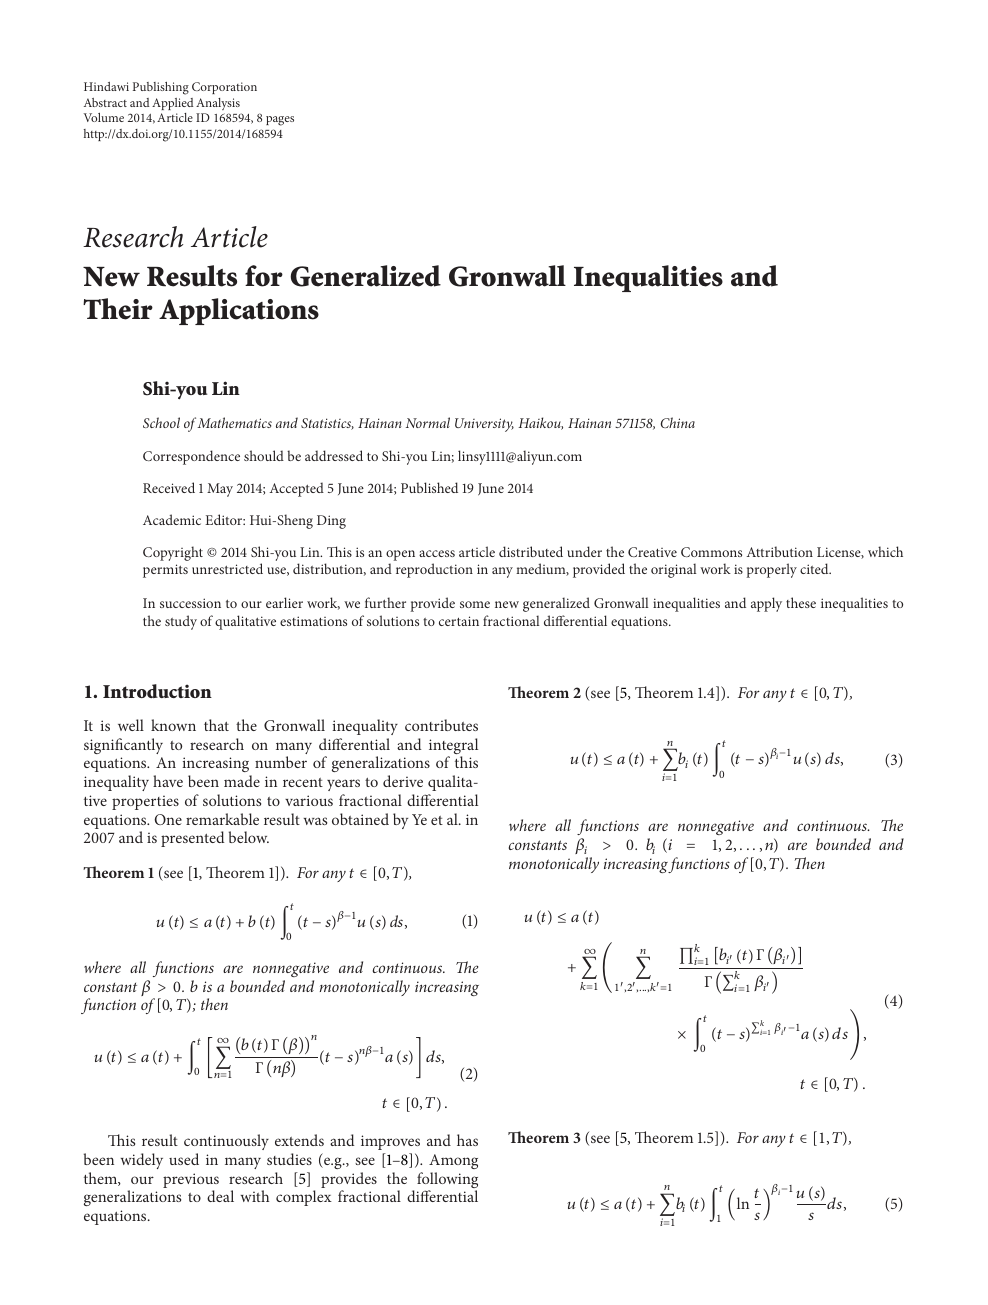 New Results For Generalized Gronwall Inequalities And Their Applications Topic Of Research Paper In Mathematics Download Scholarly Article Pdf And Read For Free On Cyberleninka Open Science Hub